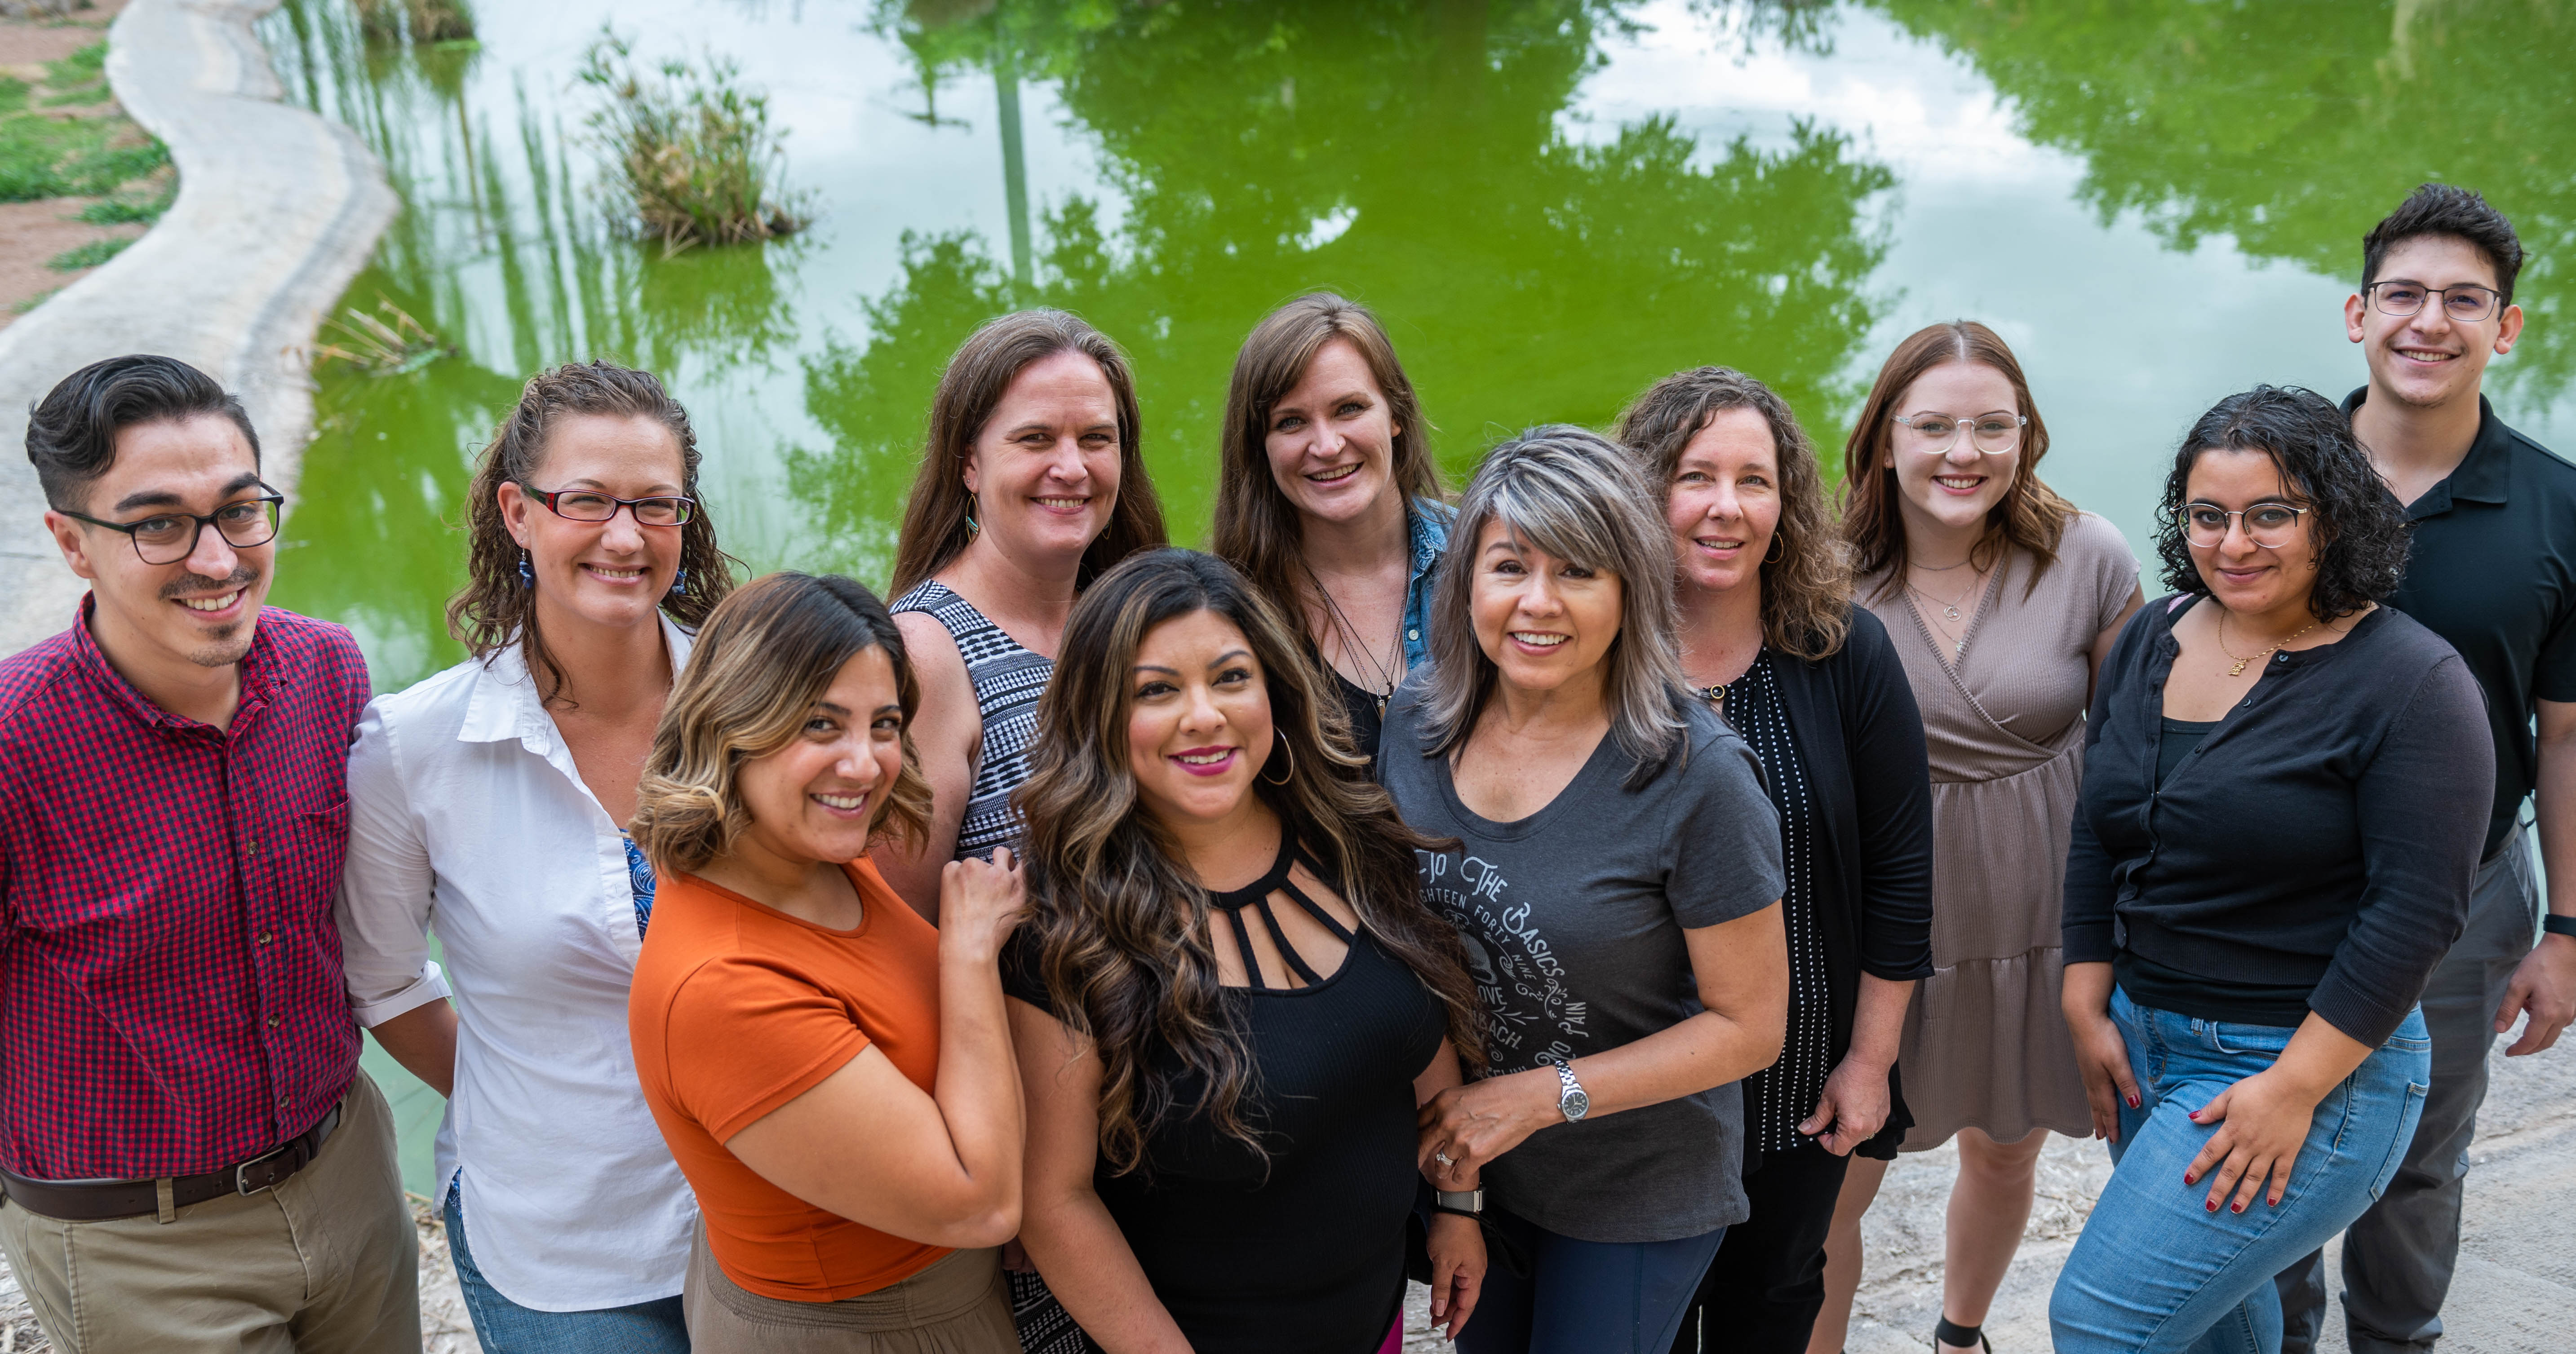 Staff members from the Center of Innovation for Behavioral Health and Wellbeing at NMSU. From left, Jesus Romero, Allison Boyce, Priscila Solis, Brooke Stanley Tou, who serves as the center's director, Lorretta Diaz, Liz Bennett, Mary Ortaleza, Sandra Gallegos, Alana Hancock, Enas Khaleq and Andrew Maldonado. Staff members not pictured: Bob Brazell, Nancy Patterson, Alexa Copeland, Ana Ginez, and Jessica Chacon.. (NMSU photo by Josh Bachman)